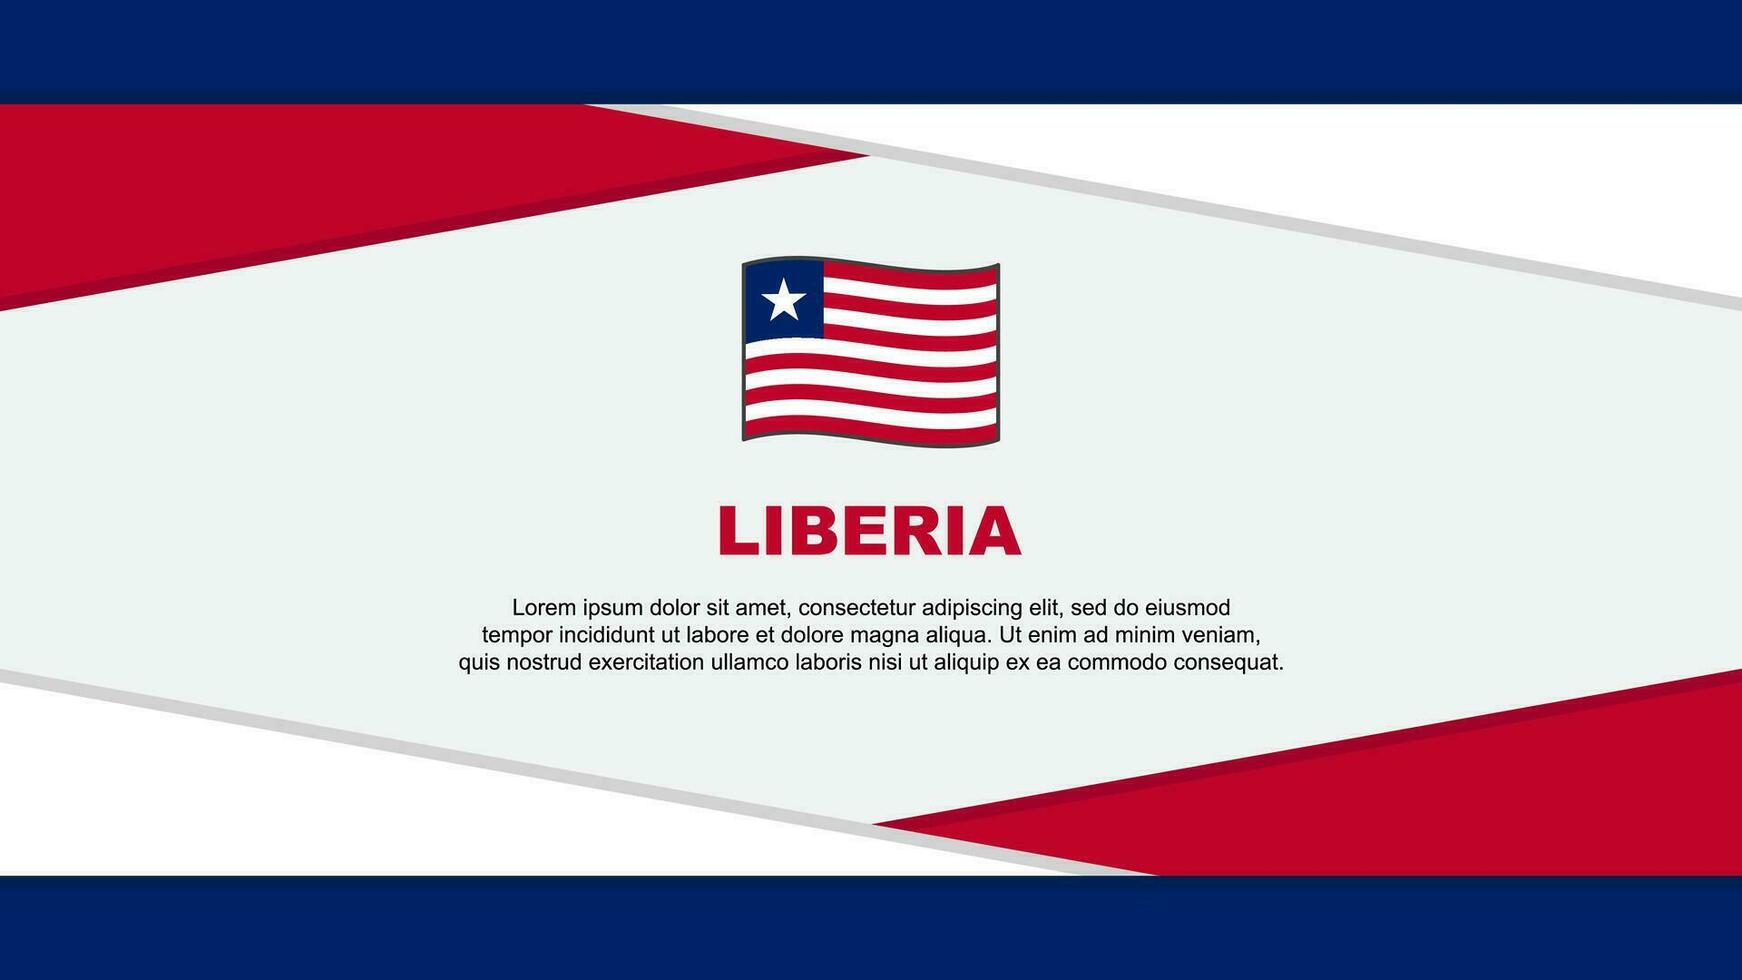 Liberia Flag Abstract Background Design Template. Liberia Independence Day Banner Cartoon Vector Illustration. Liberia Vector